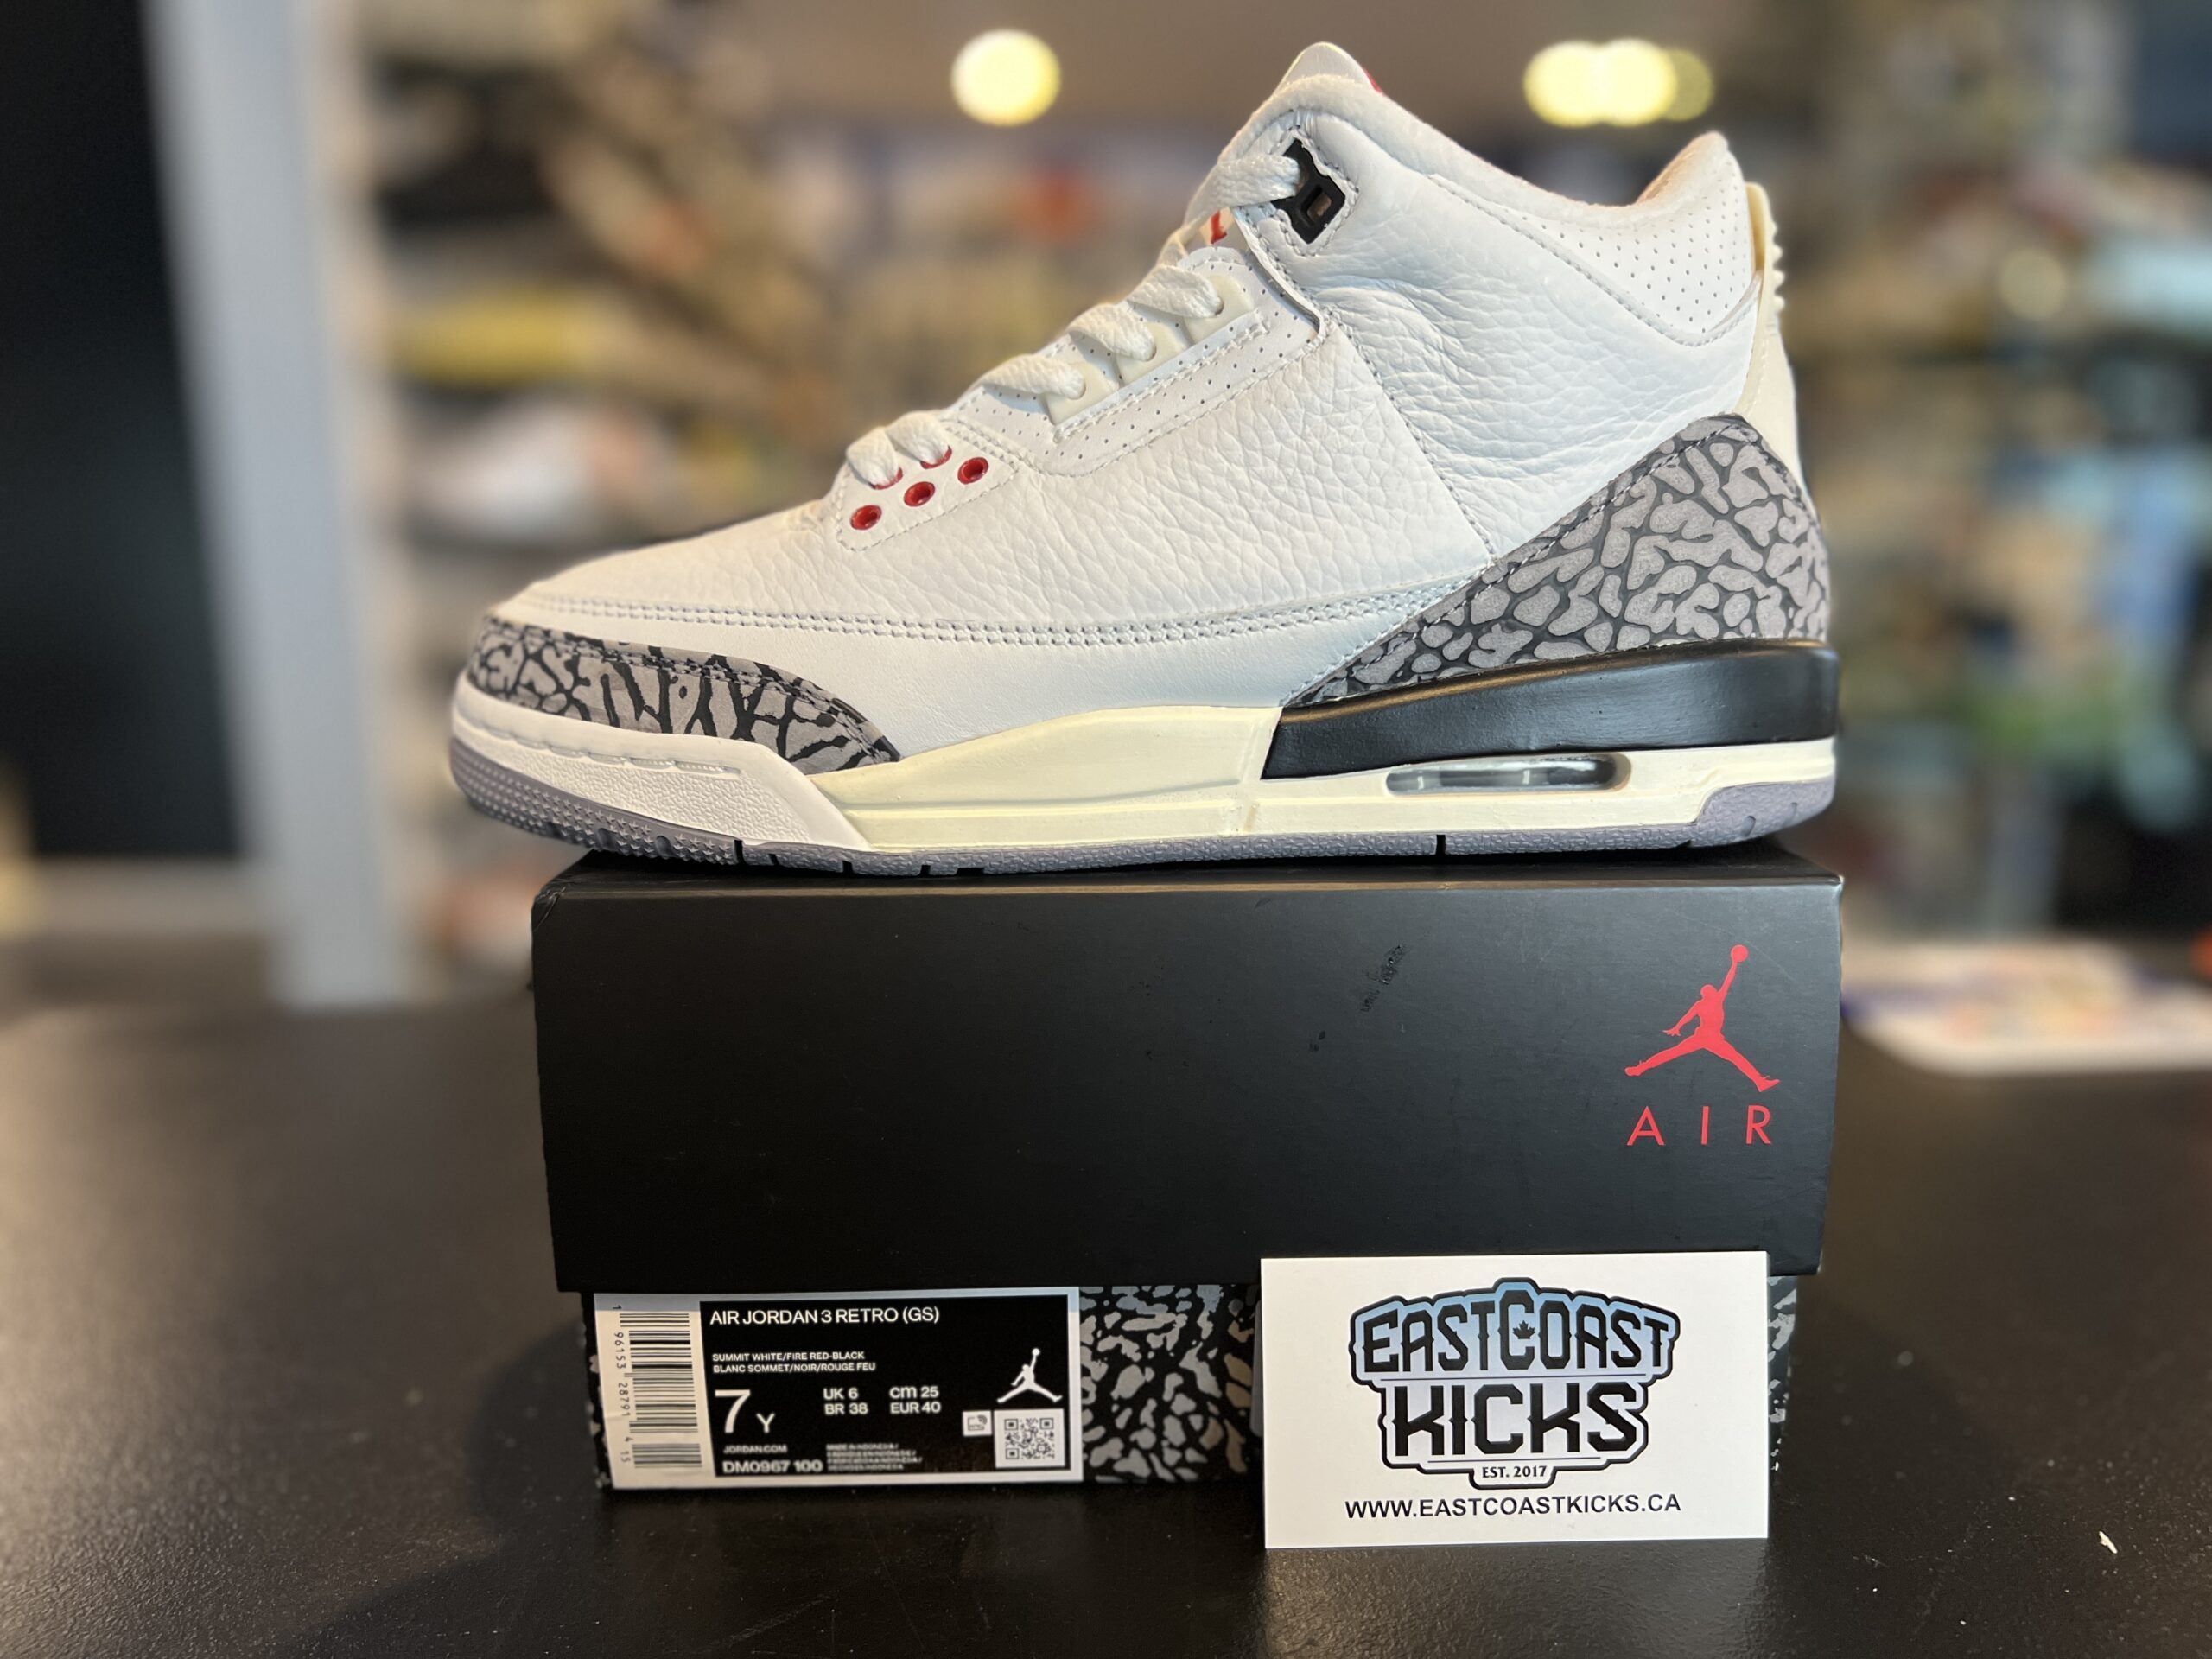 Preowned Jordan 3 Retro White Cement Reimagined Size 7Y